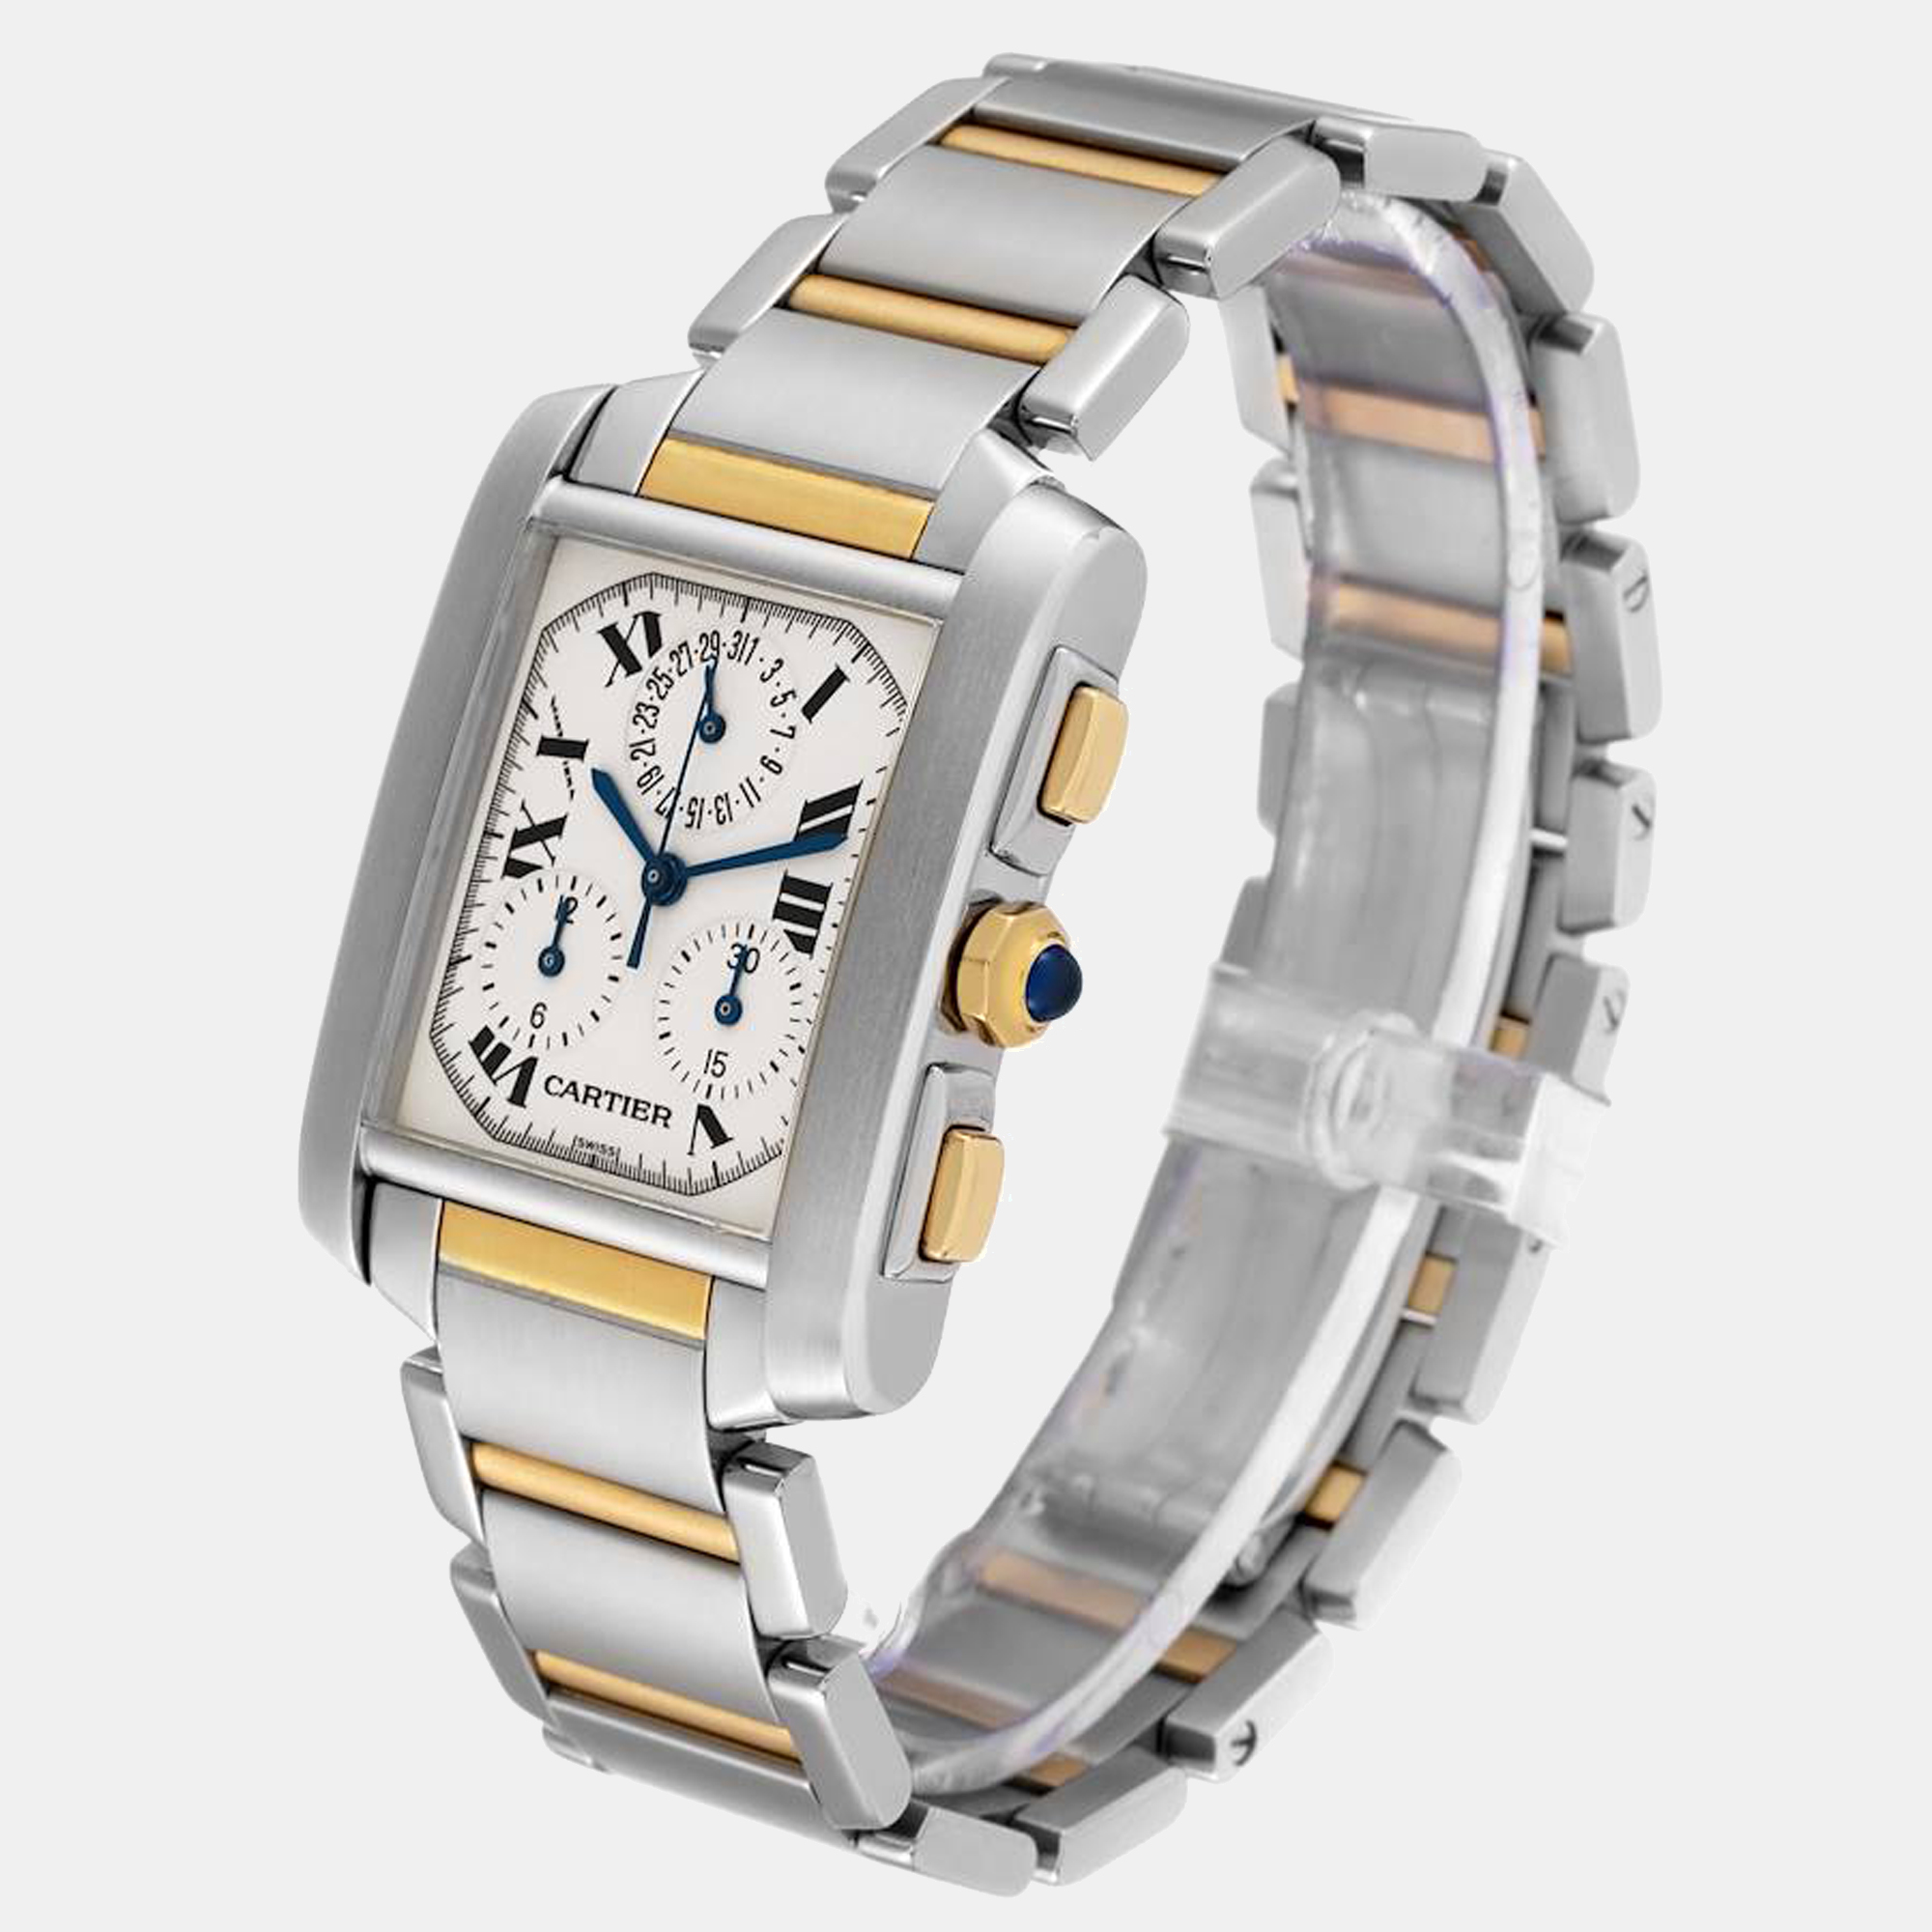 Cartier Silver 18k Yellow Gold And Stainless Steel Tank Francaise W51004Q4 Men's Wristwatch 37 Mm